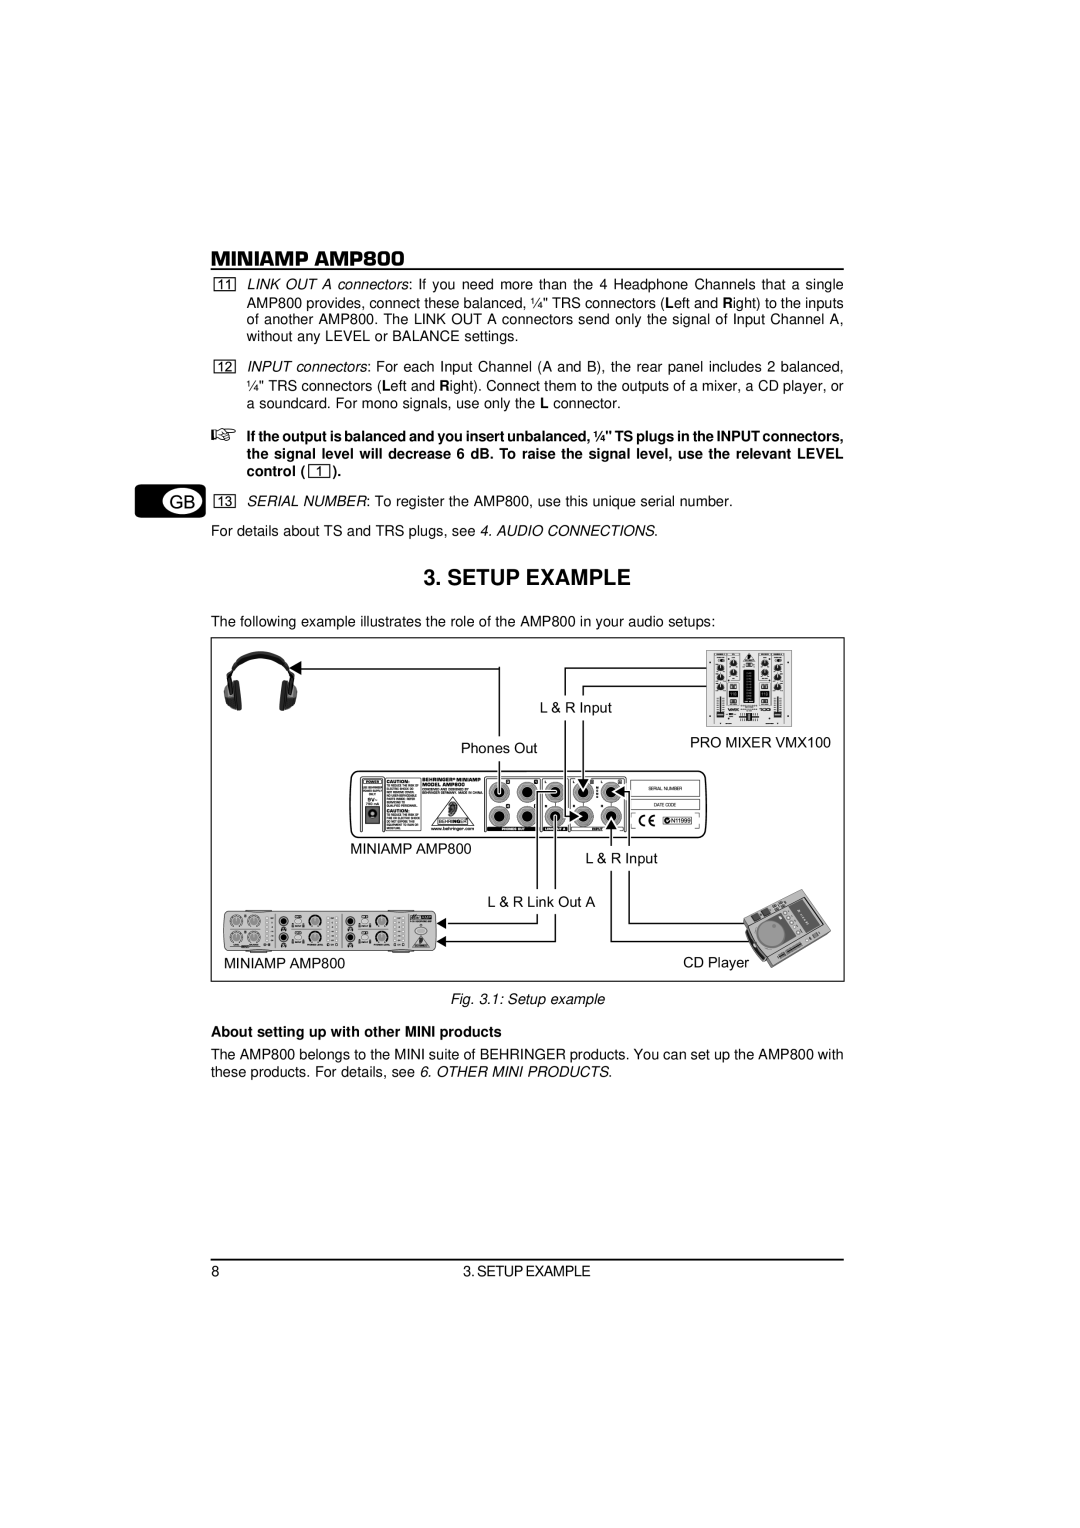 Behringer MINIAMP AMP800 user manual Setup Example, 1: Setup example, About setting up with other MINI products 